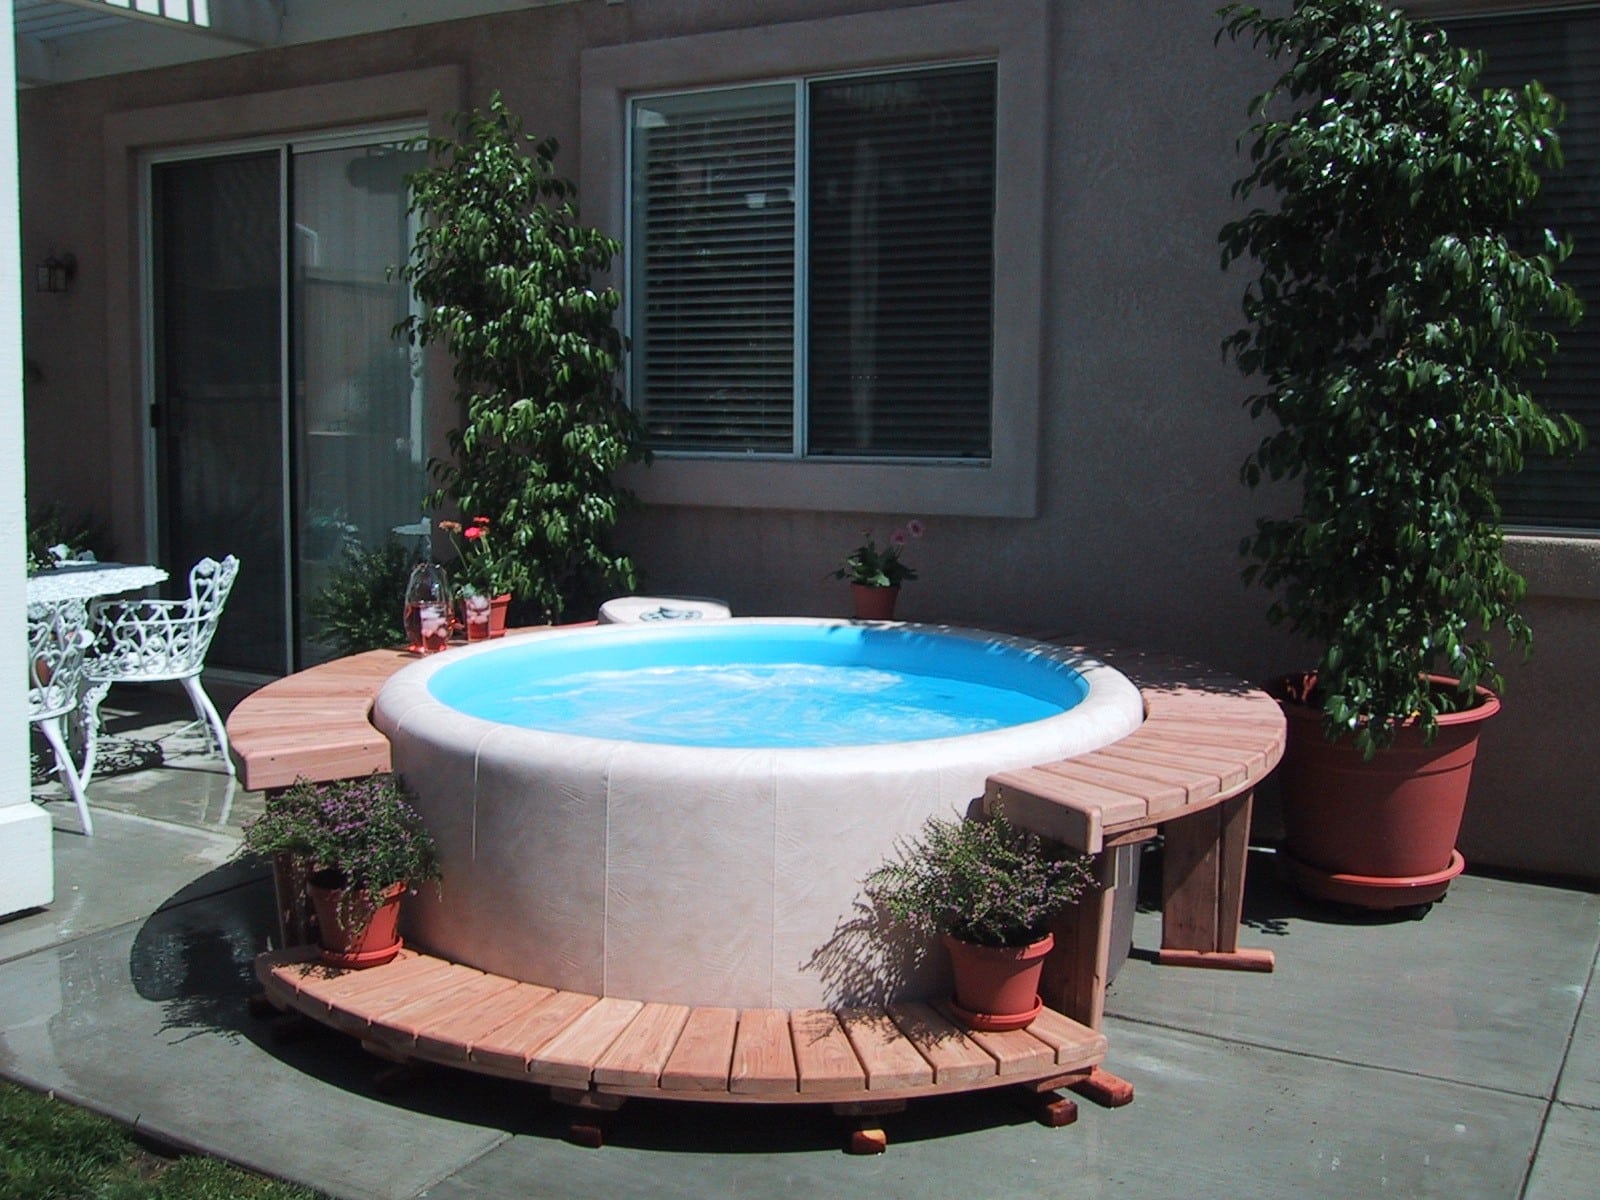 Enjoy The Benefits Of A Hot Tub With A Lower Cost To Your Utility Bill